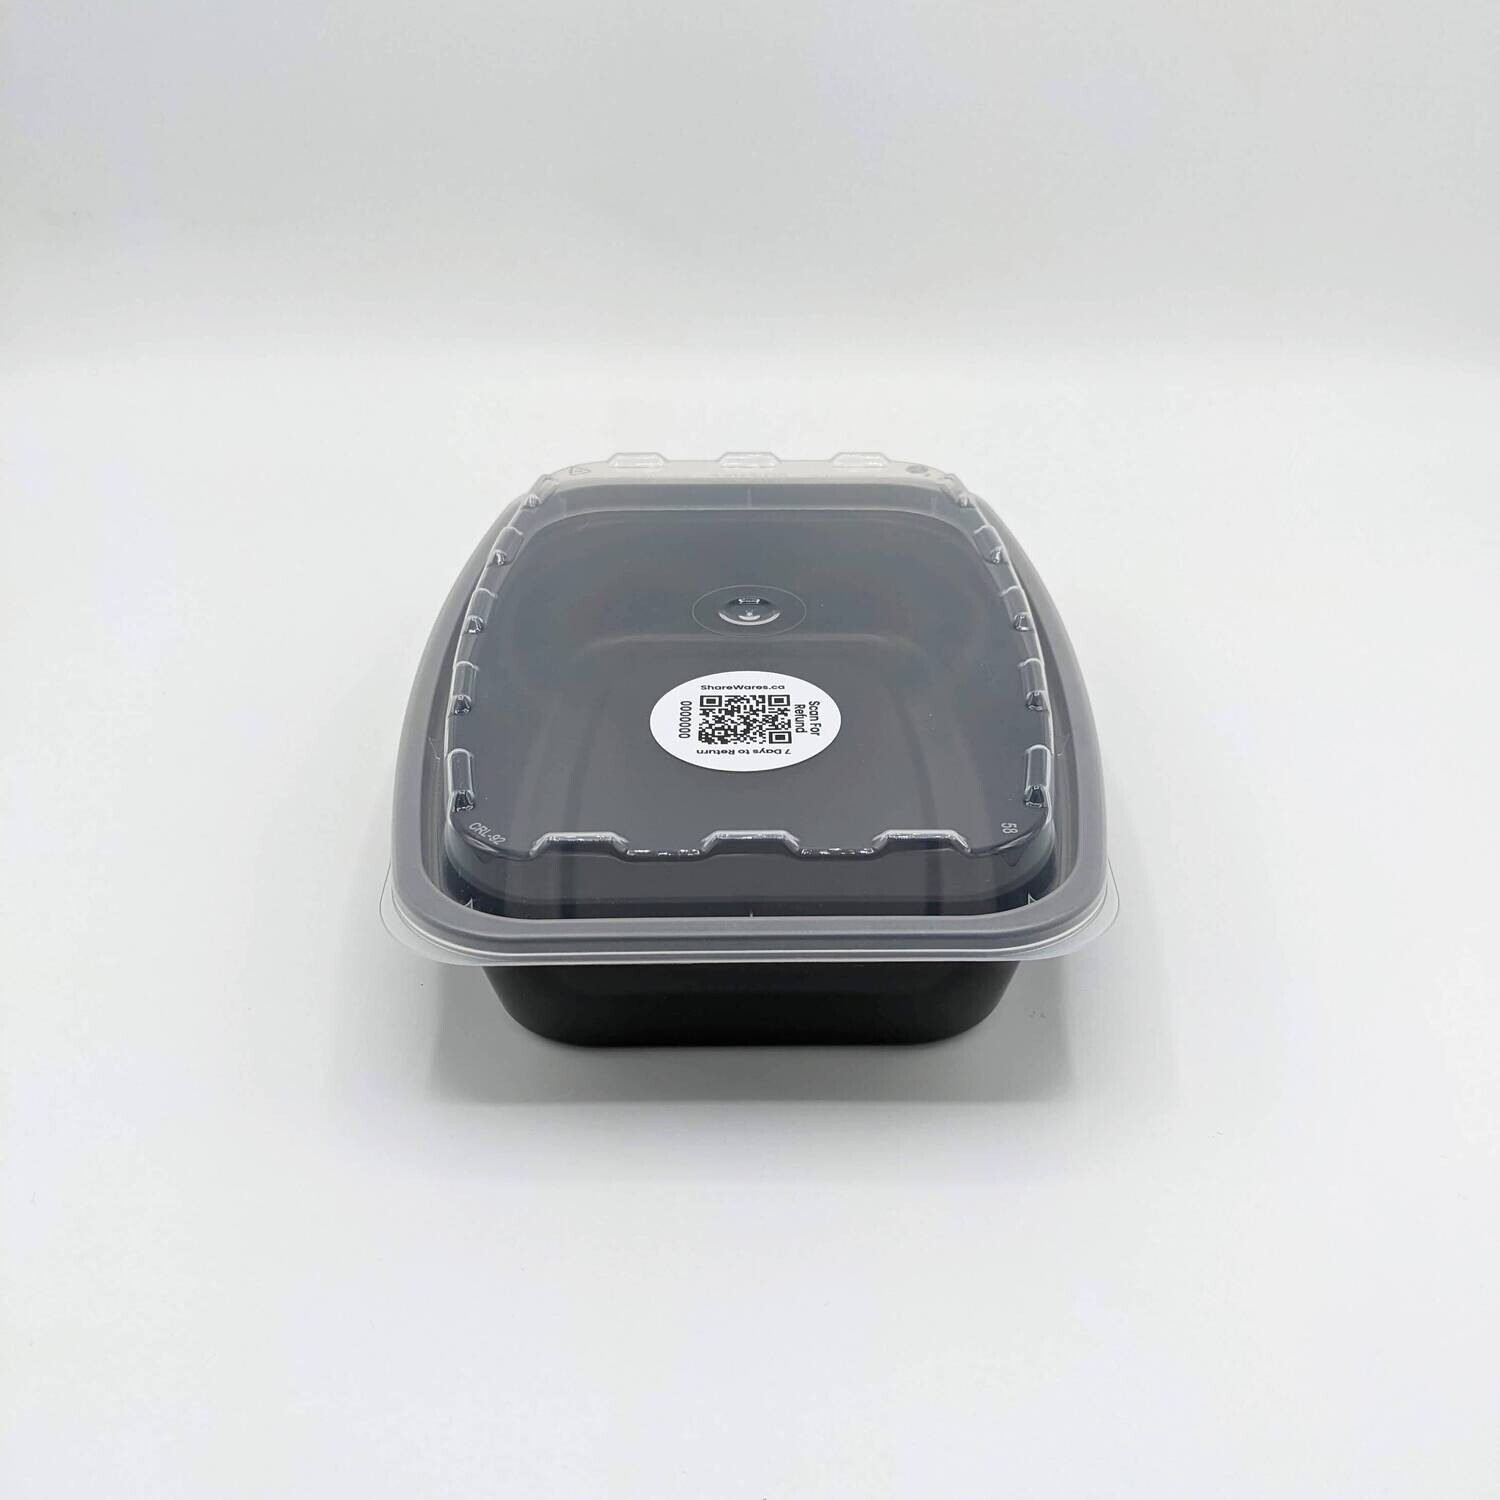 Black Reusable Takeout Container (28 oz)